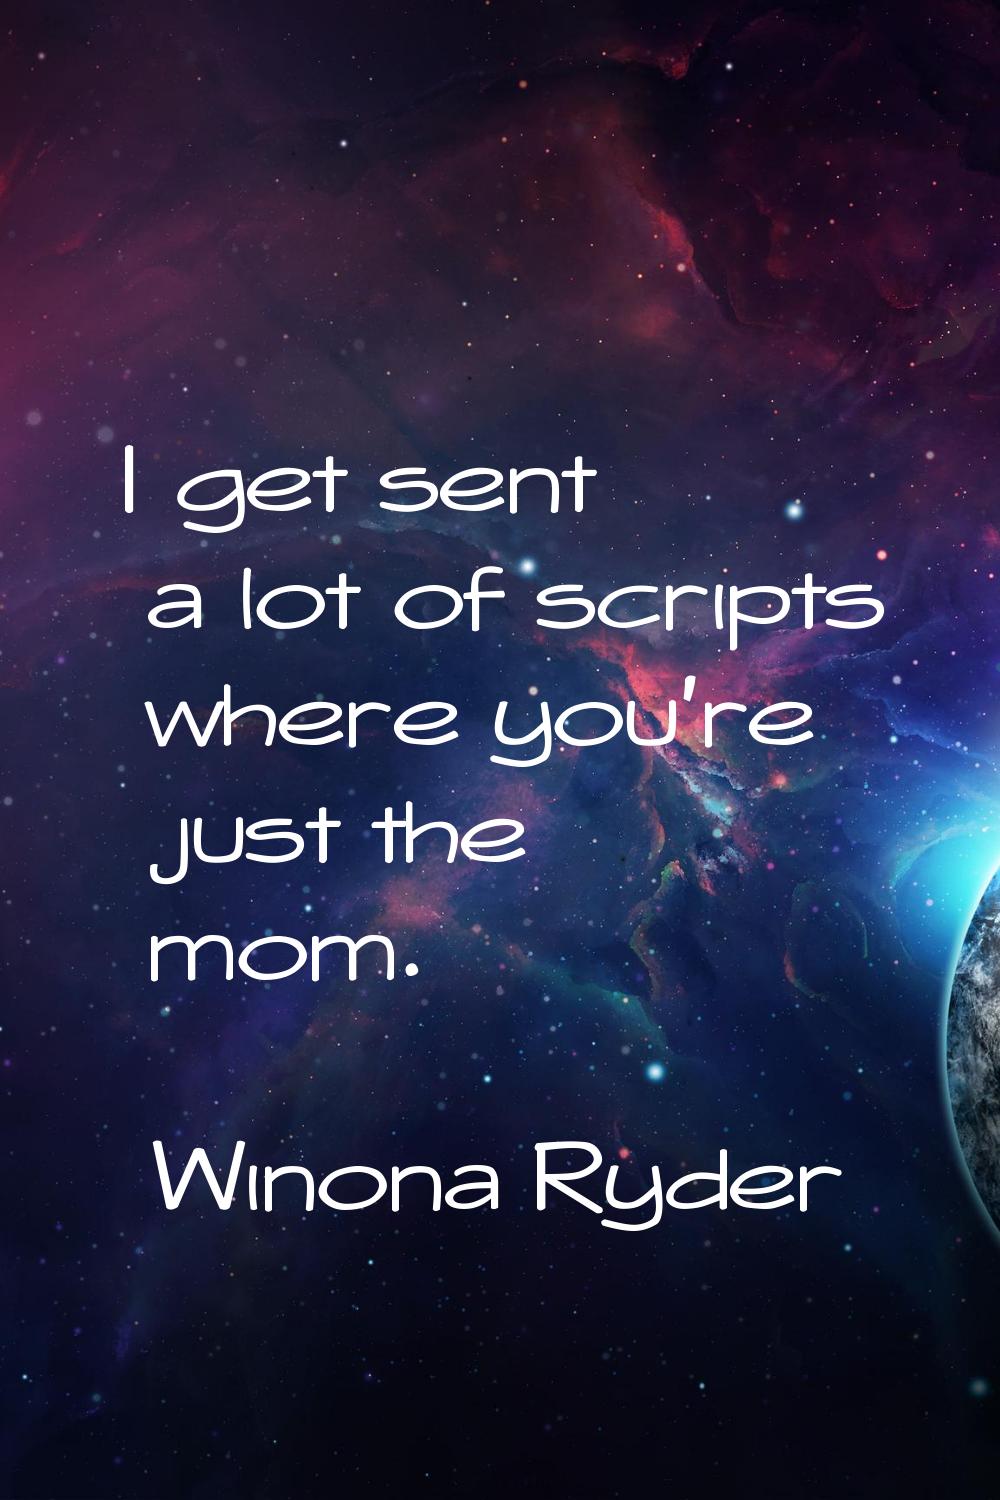 I get sent a lot of scripts where you're just the mom.